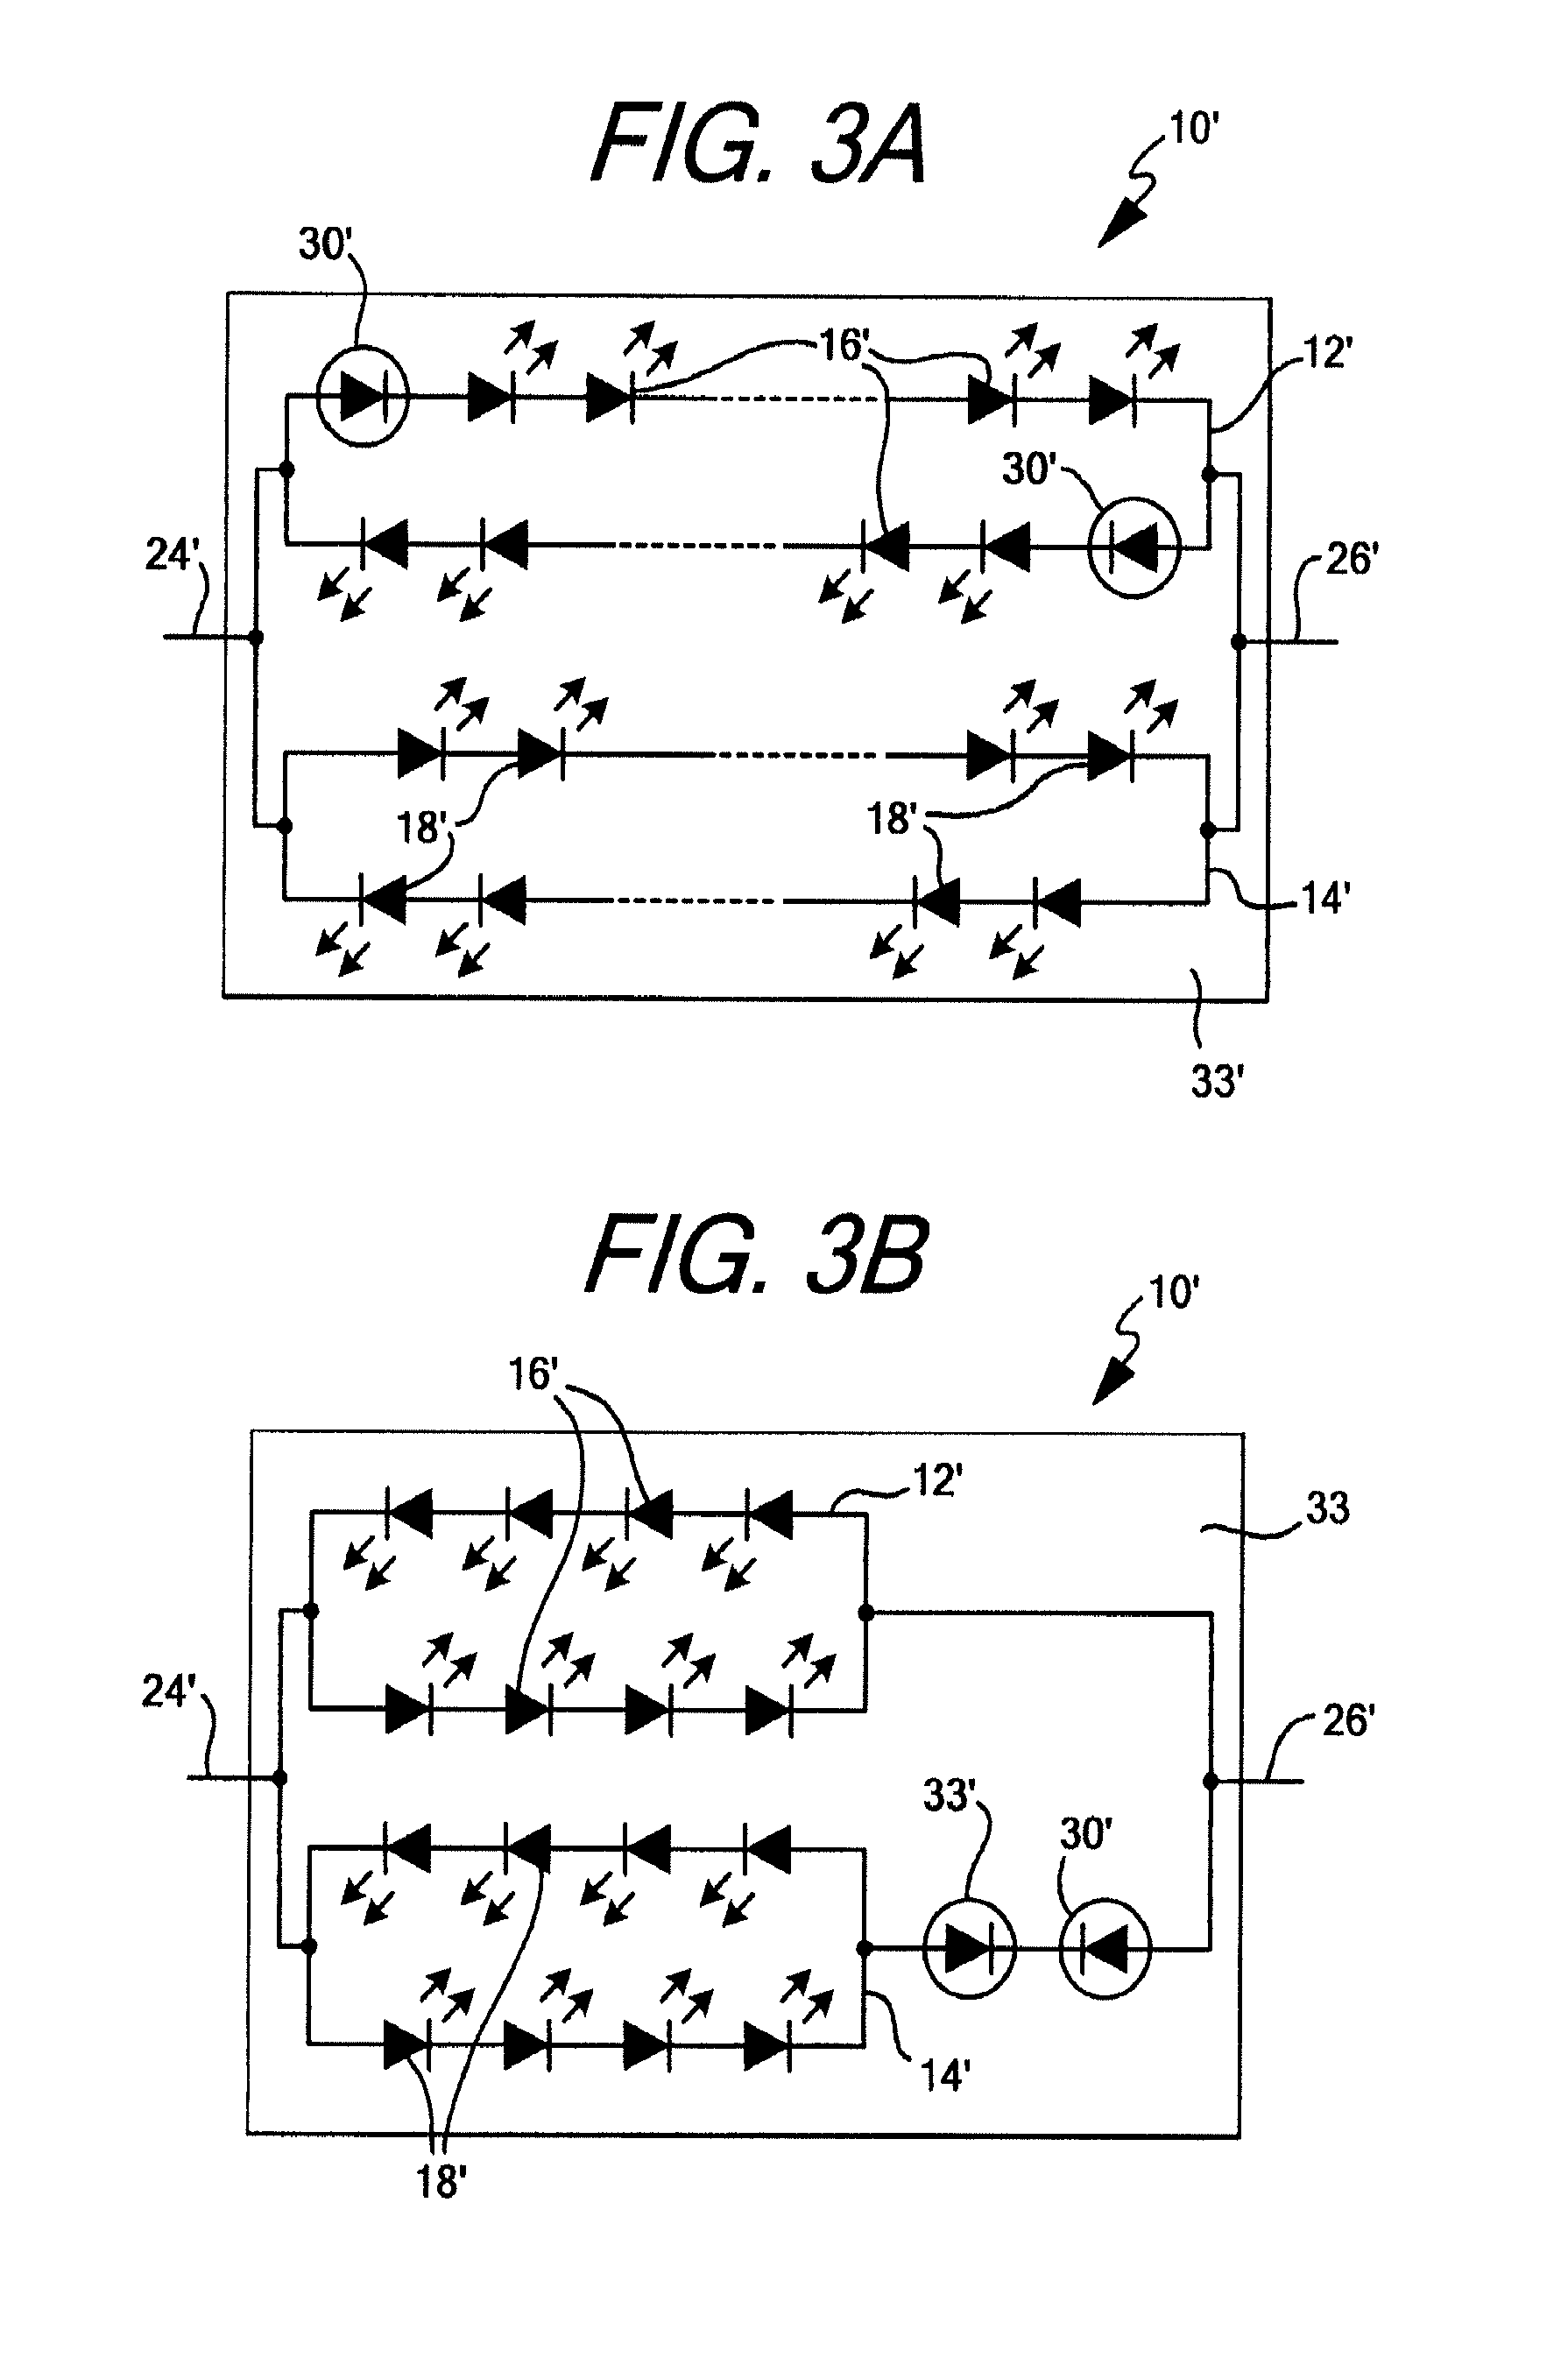 Color temperature controlled and low THD LED lighting devices and systems and methods of driving the same